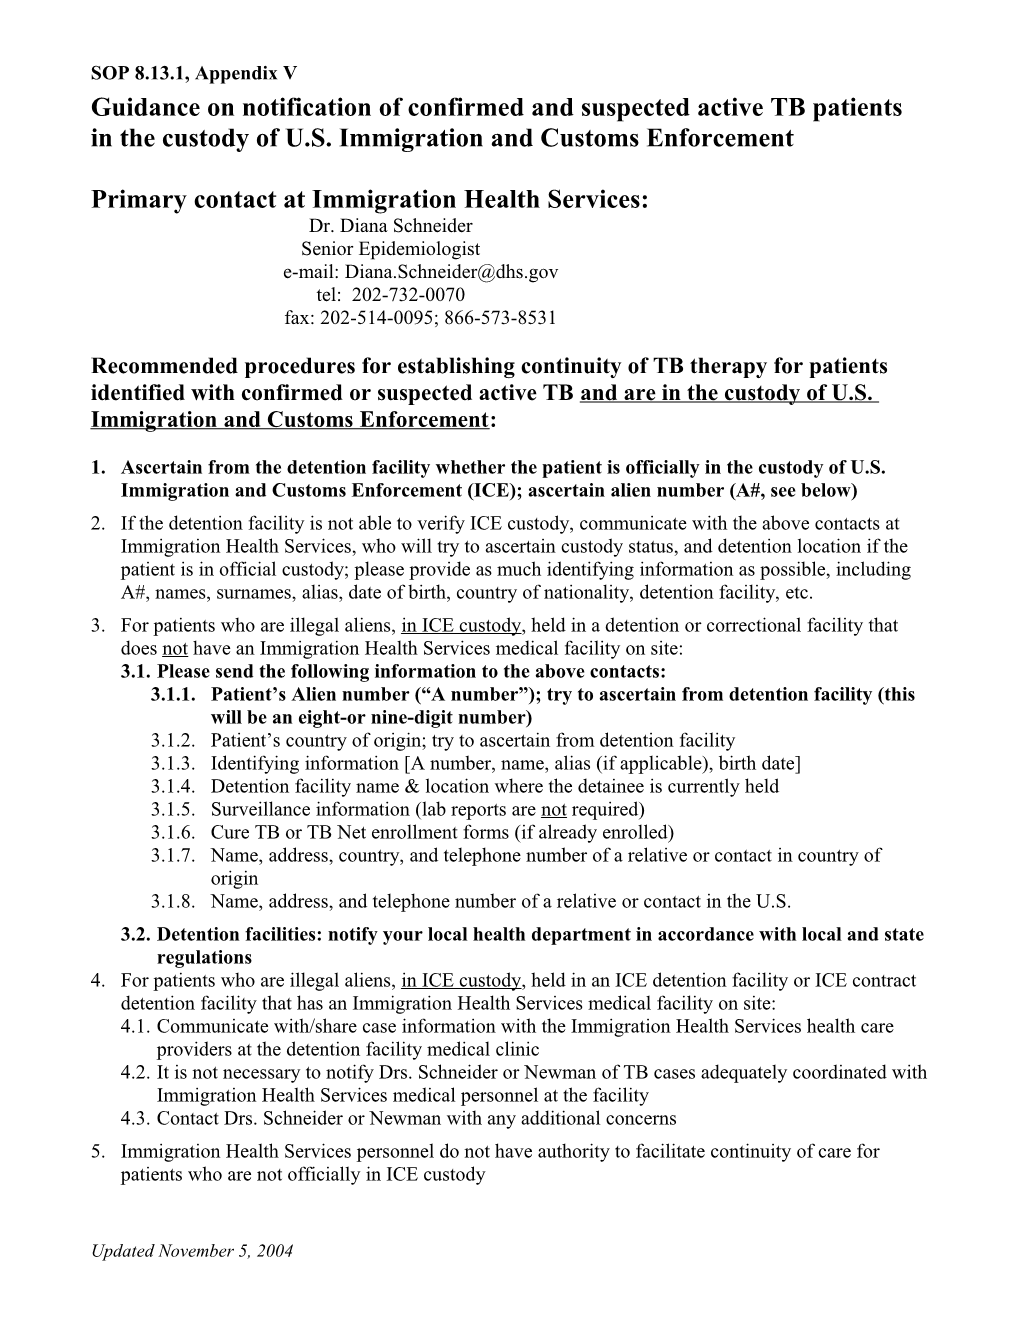 Primary Contact at Immigration Health Services